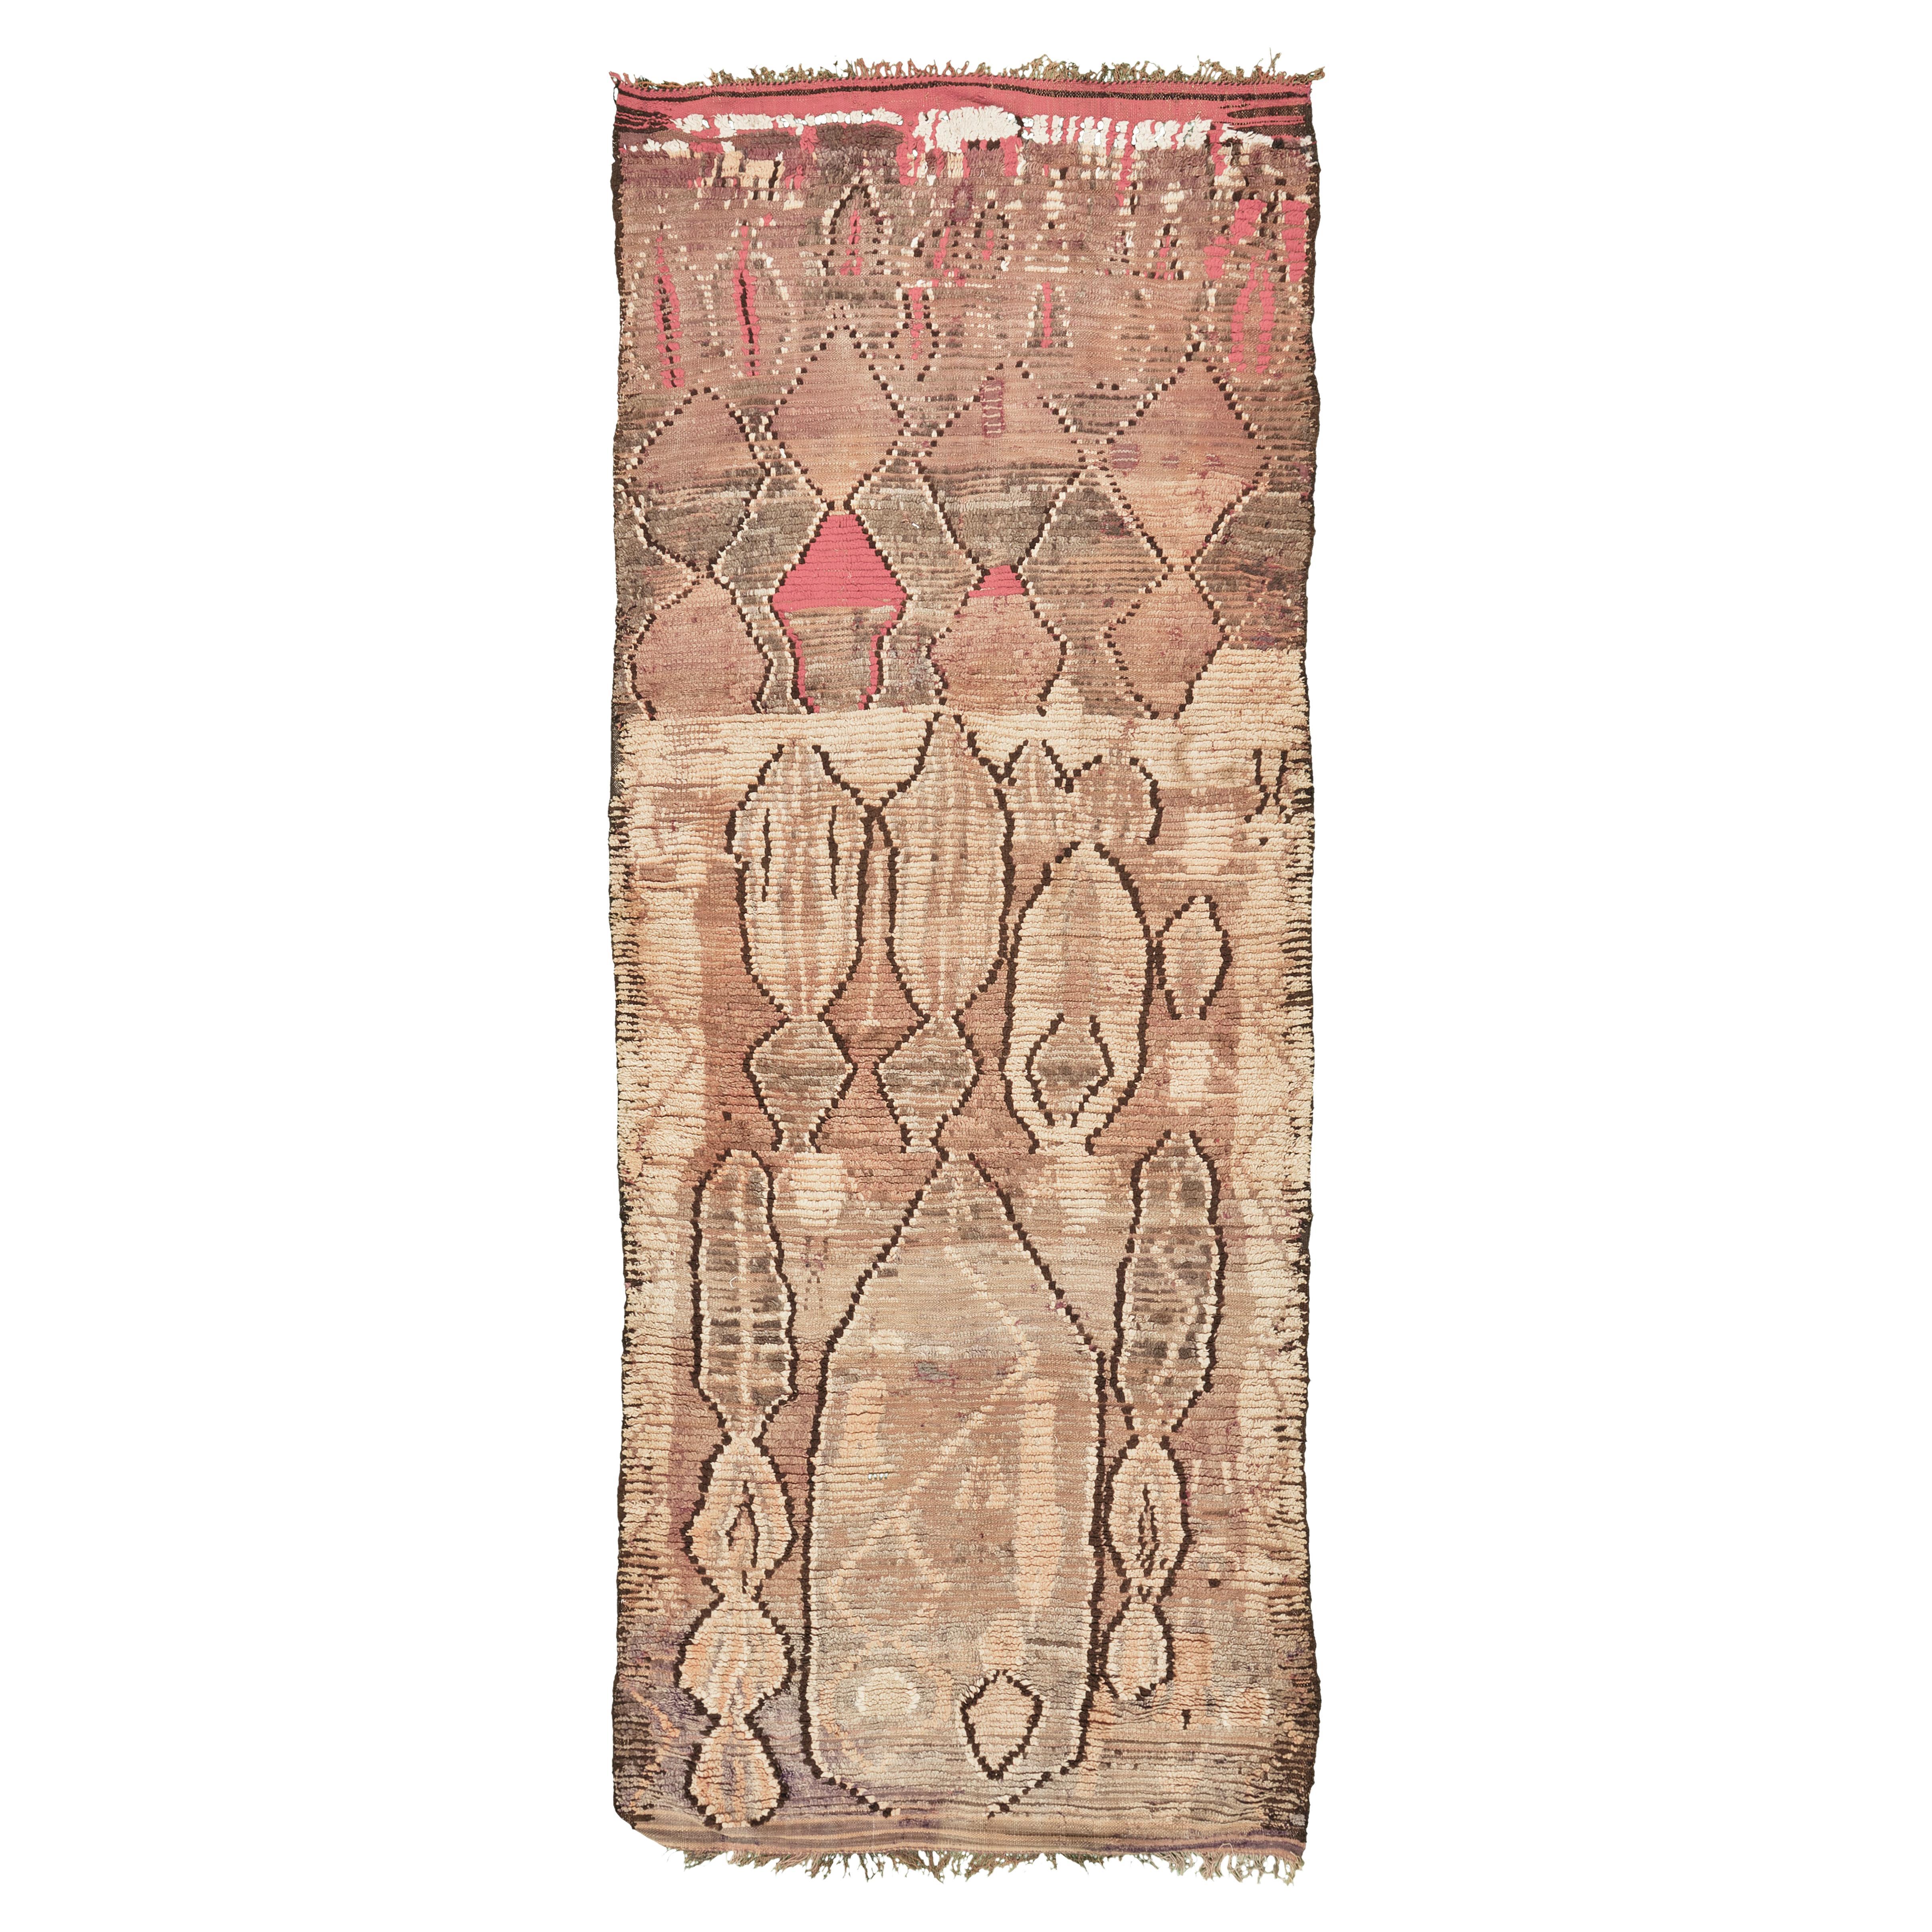 Mehraban Rugs Moroccan and North African Rugs